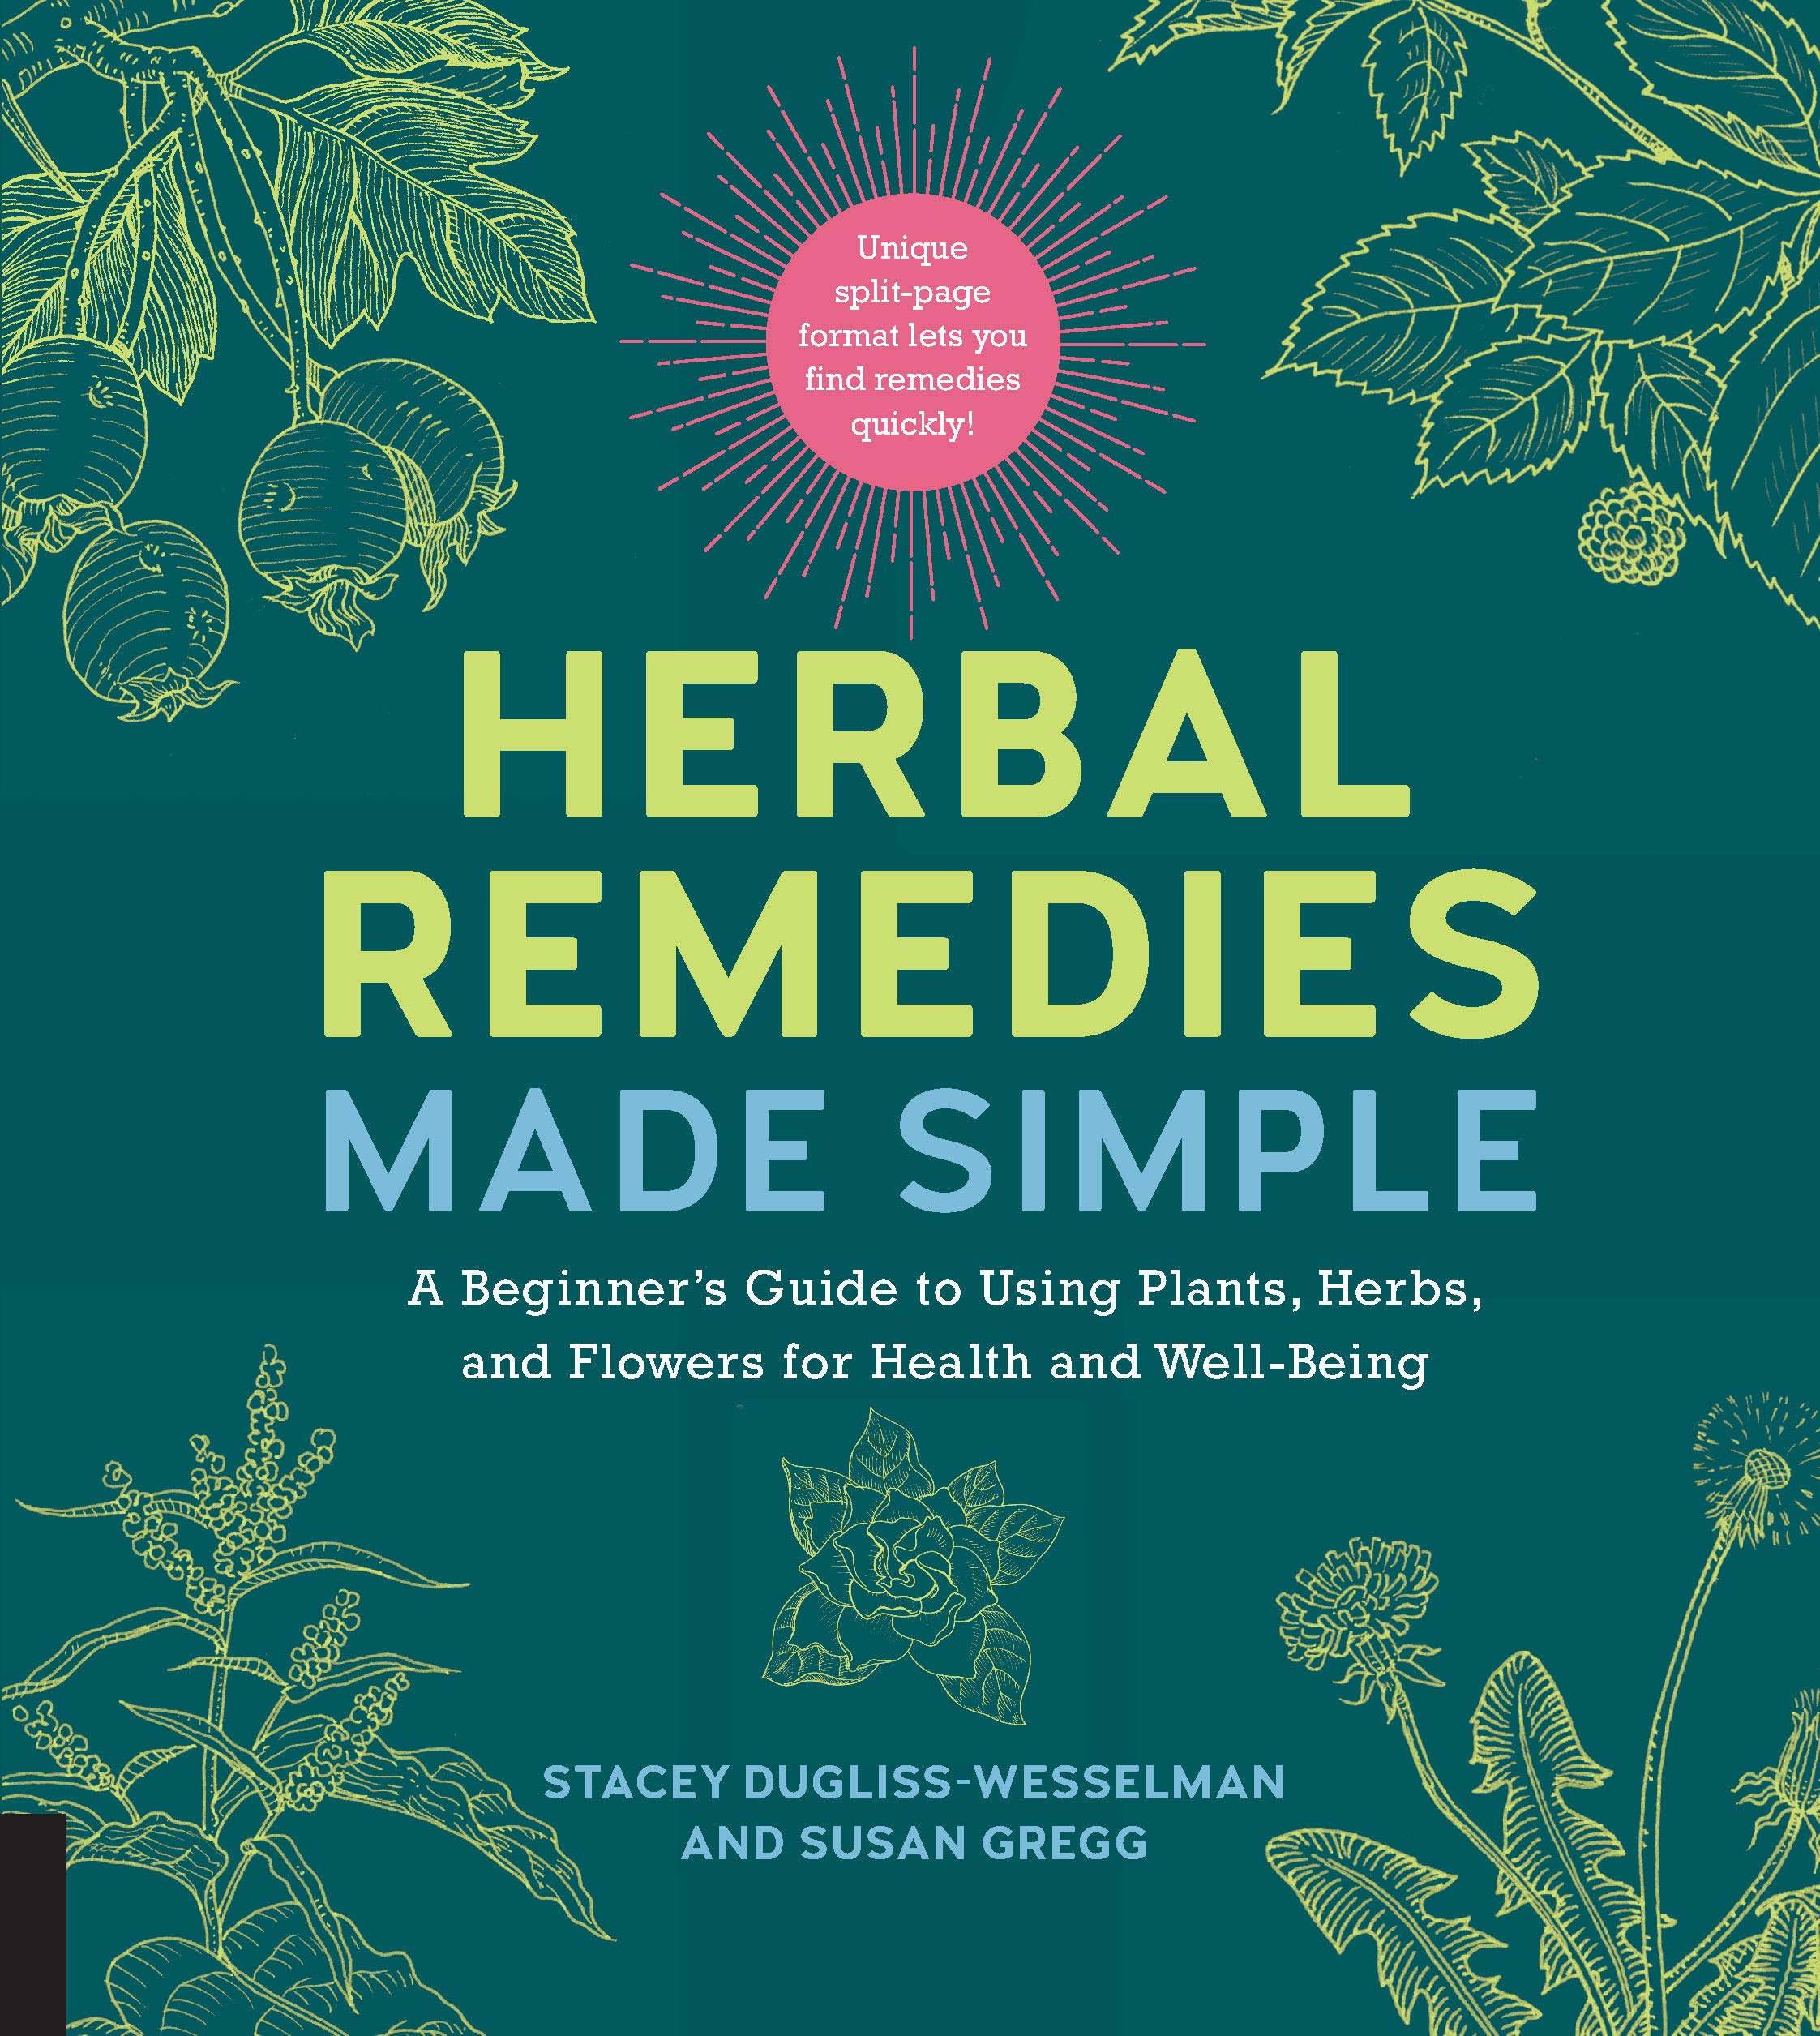 Herbal Remedies Made Simple - Stacey Dugliss-Wesselman and Susan Gregg